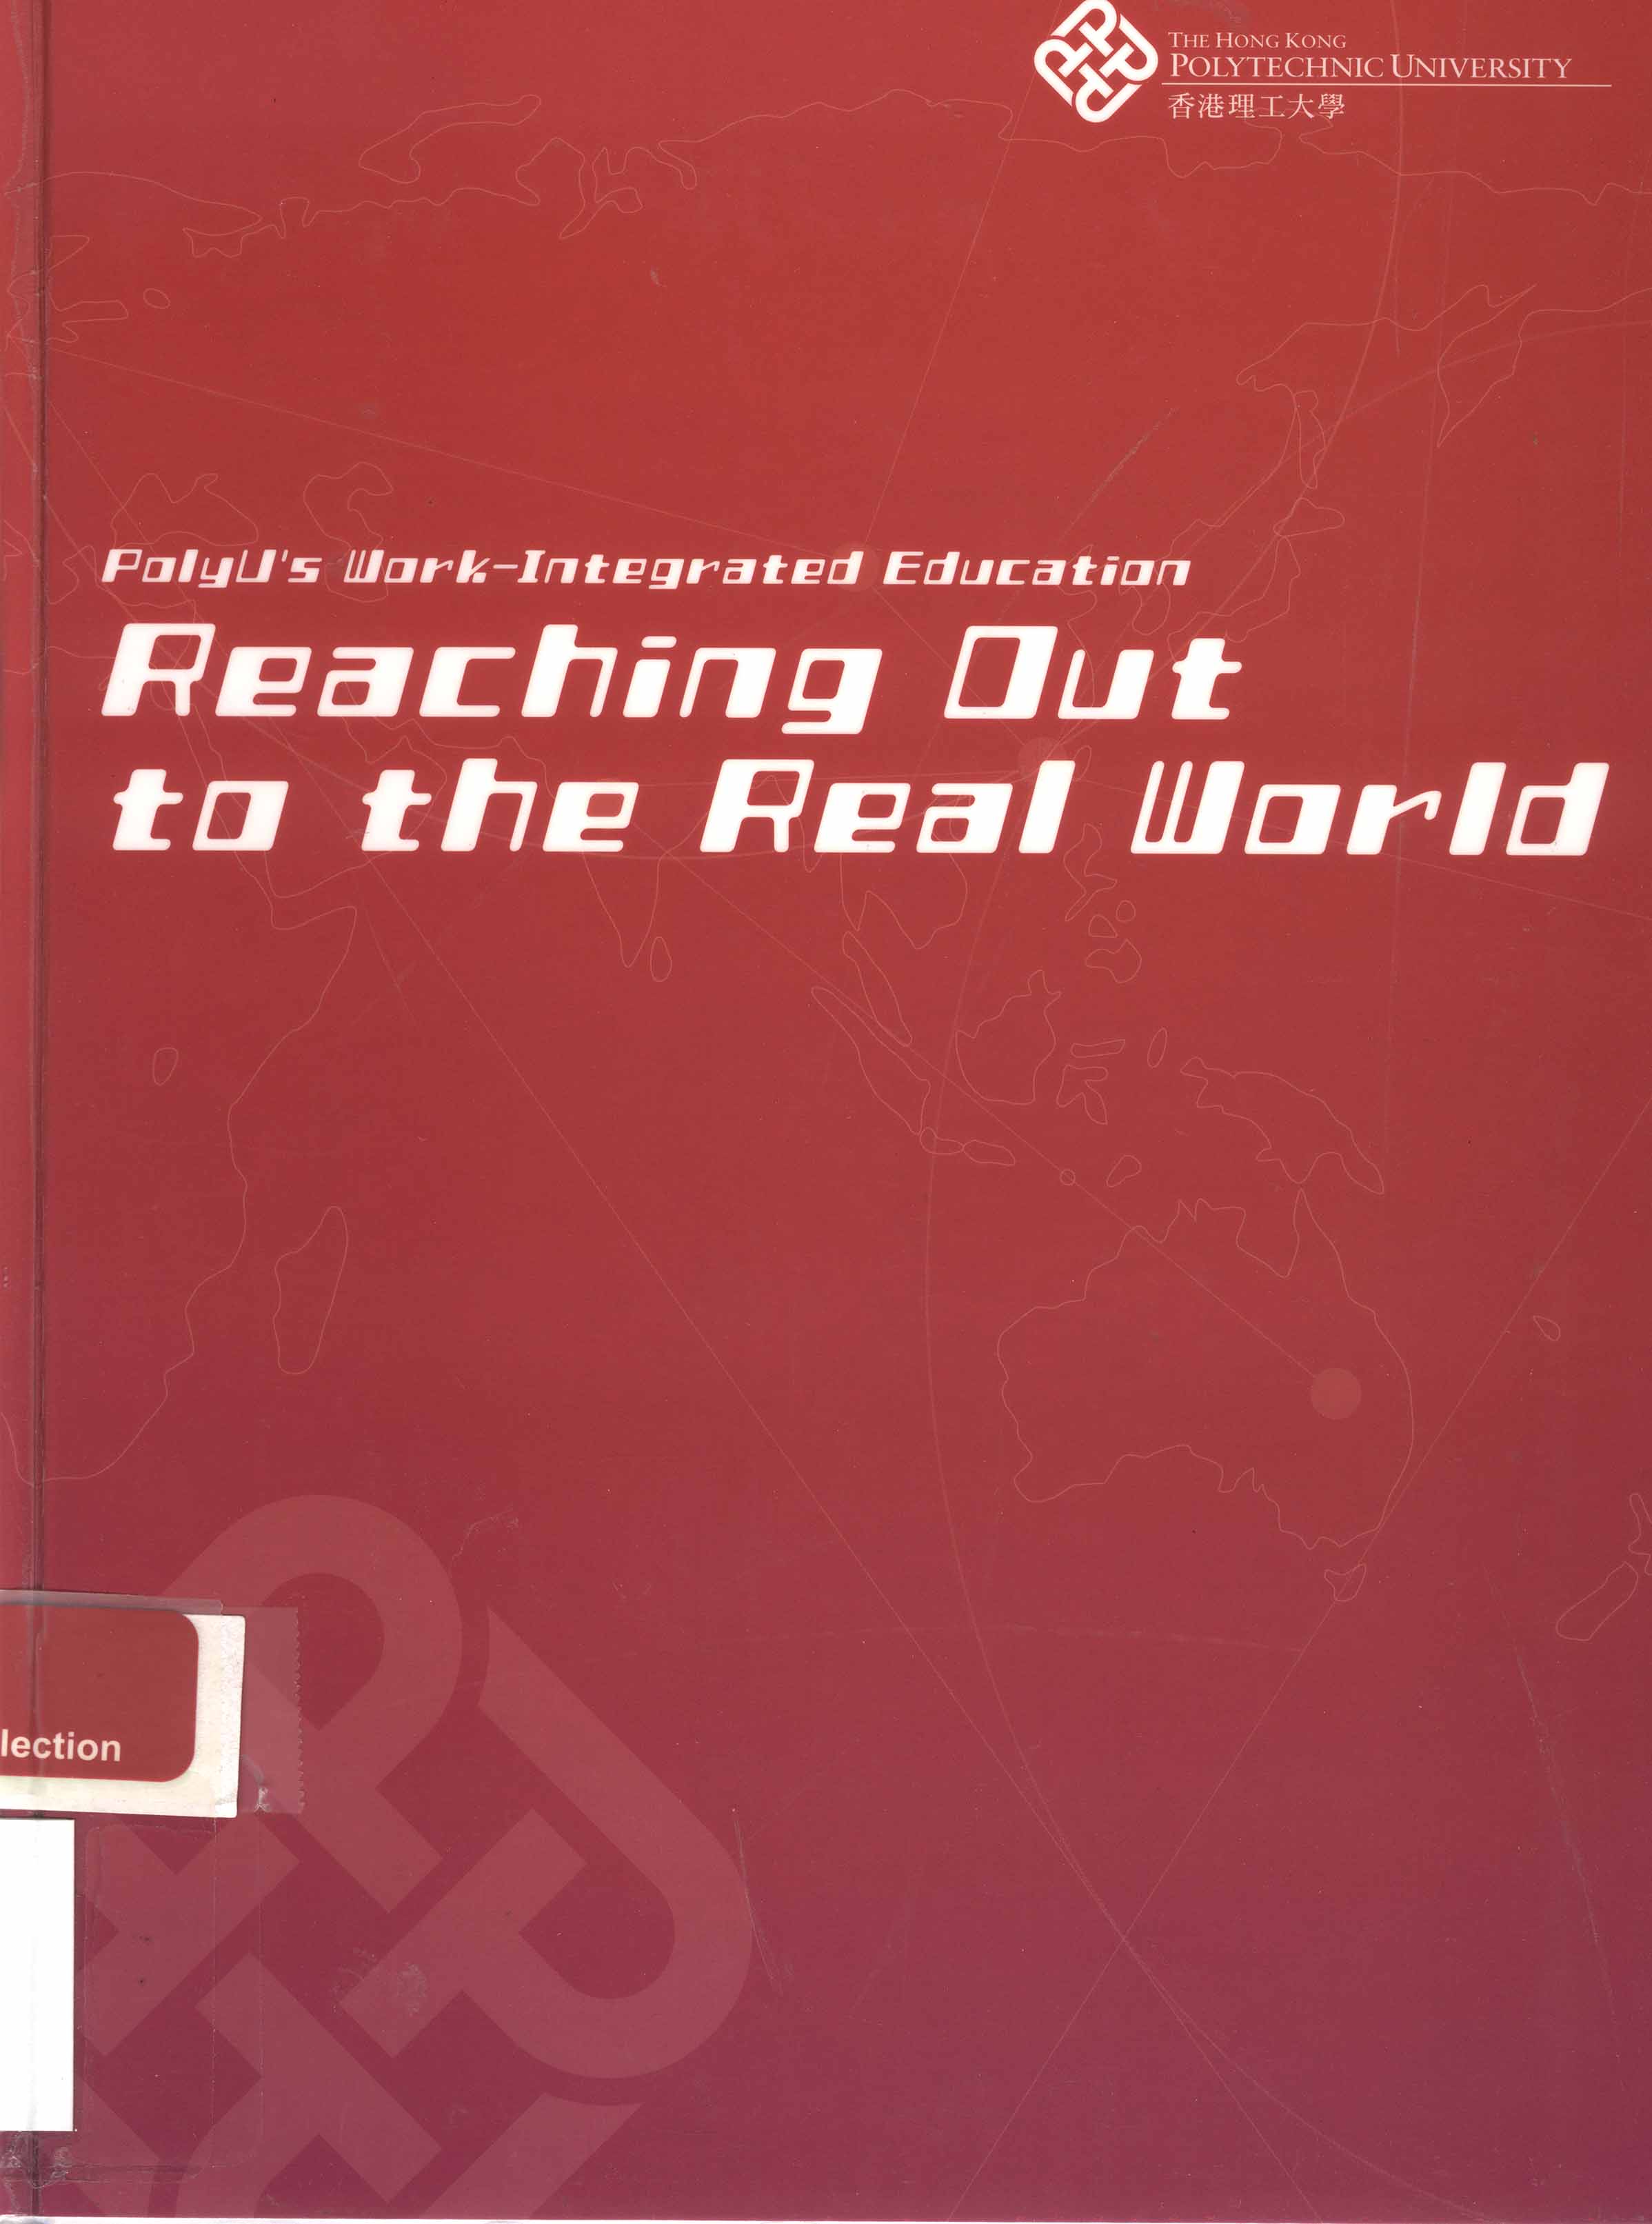 Polyu's work-integrated education : reaching out to the real world